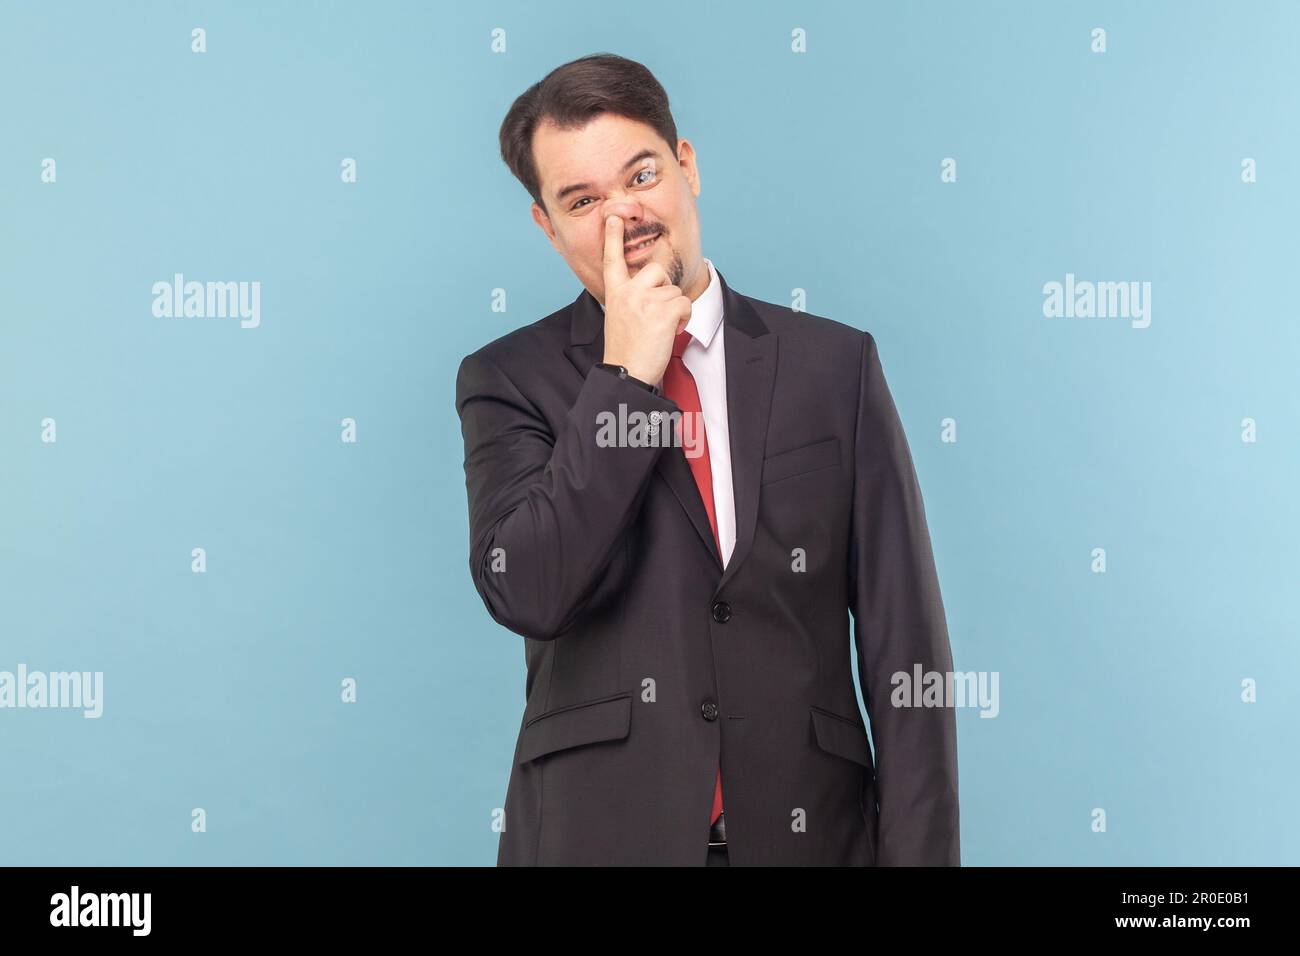 Portrait of funny childish man with mustache standing having comical facial expression, keeps finger in nose, wearing black suit with red tie. Indoor studio shot isolated on light blue background. Stock Photo